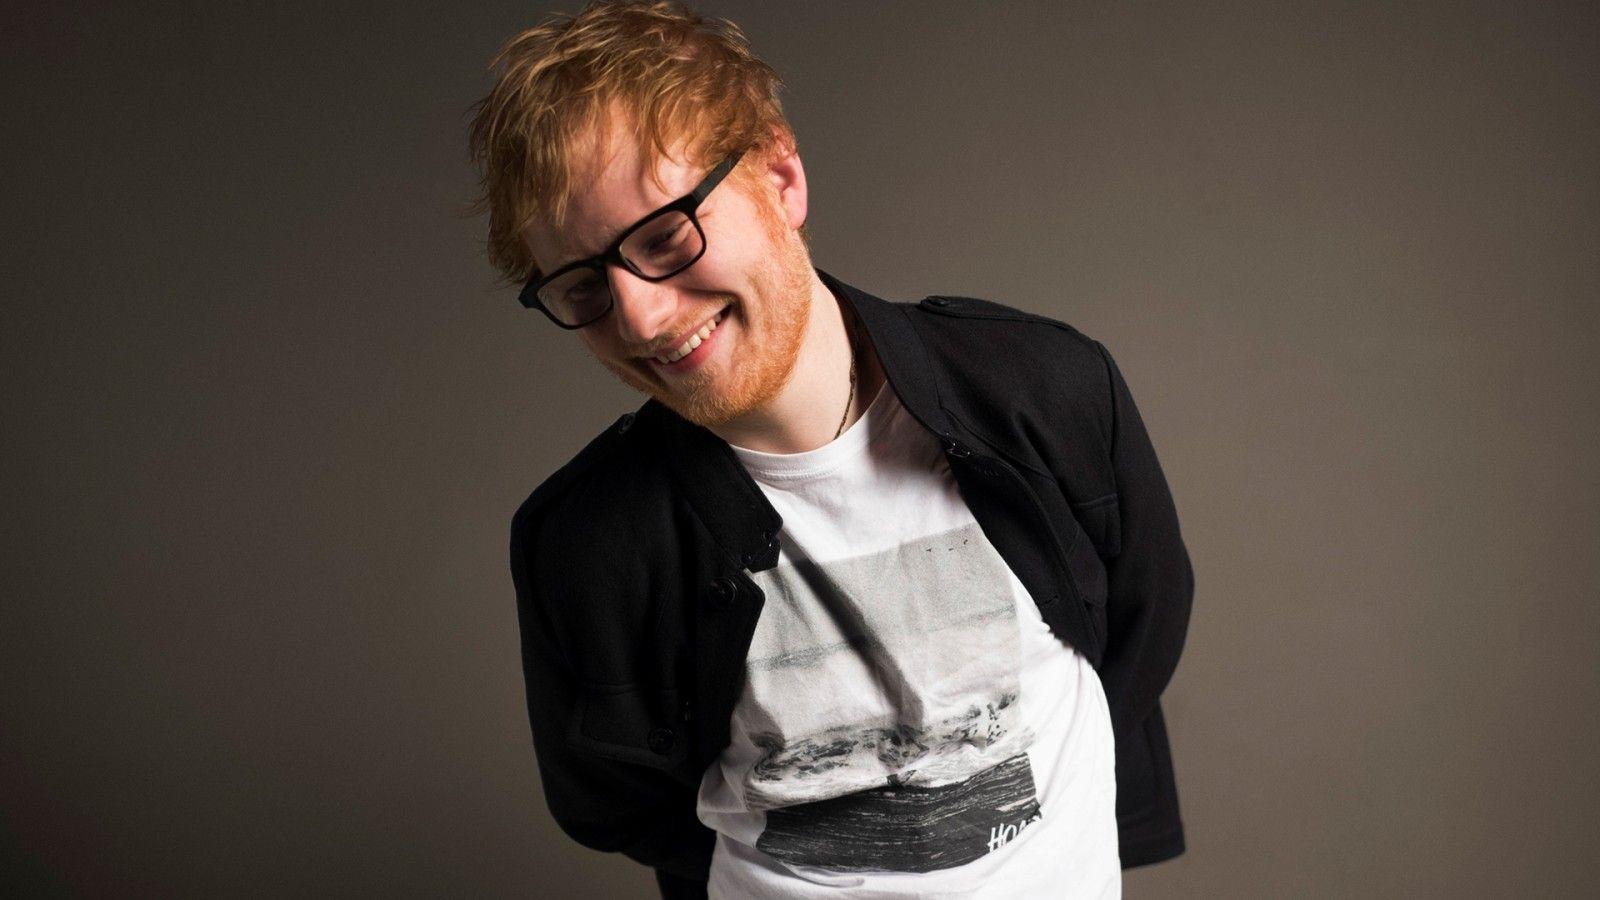 Ed Sheeran To Embark On 48 Date North American Tour This Summer